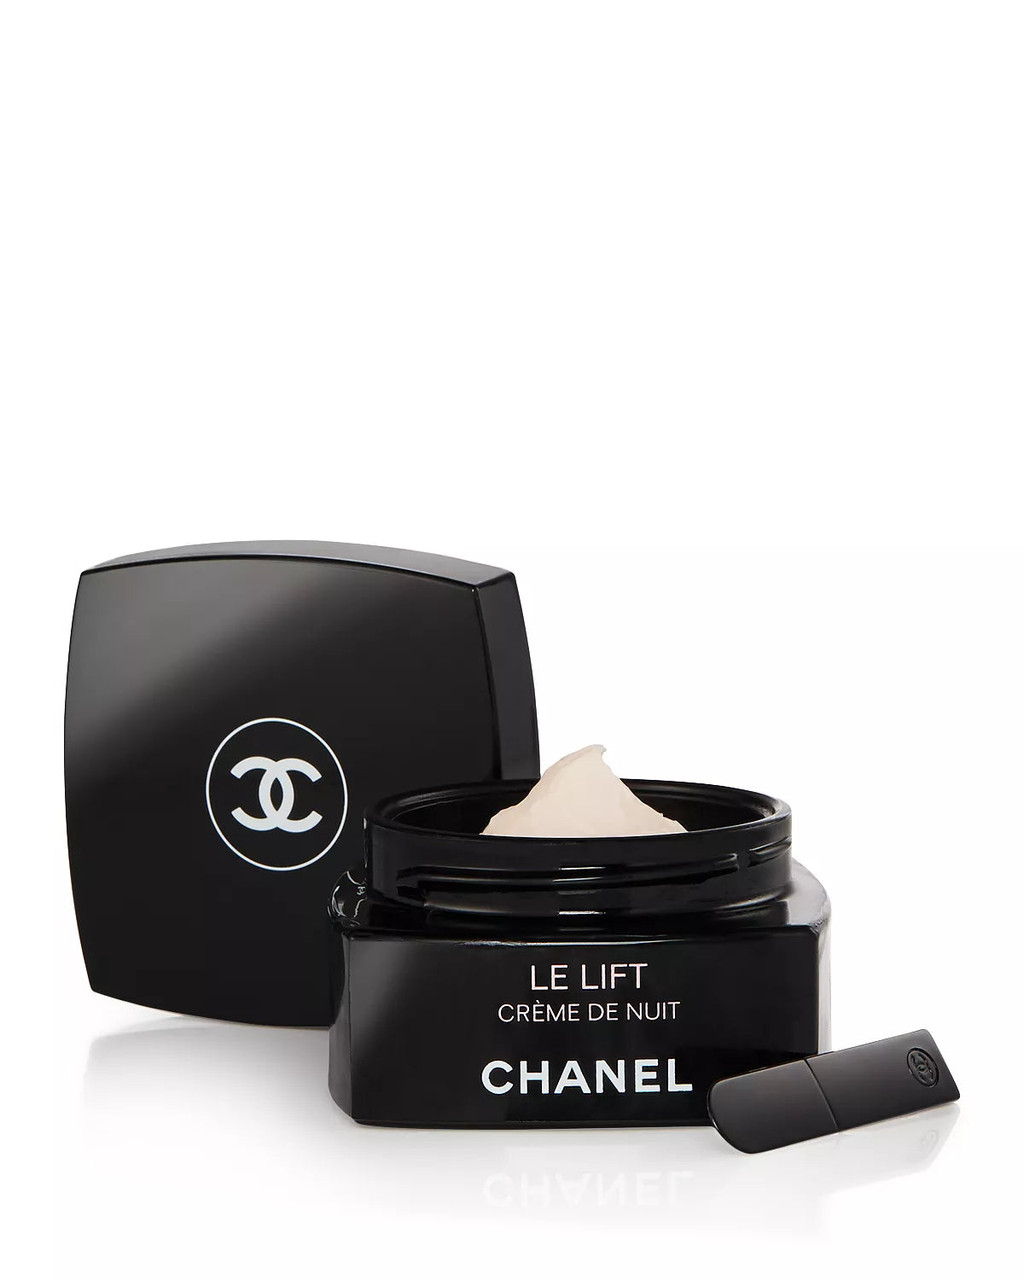 Chanel Le Lift Creme De Nuit Smoothing and Firming Night Cream 1.7 oz - 50 g